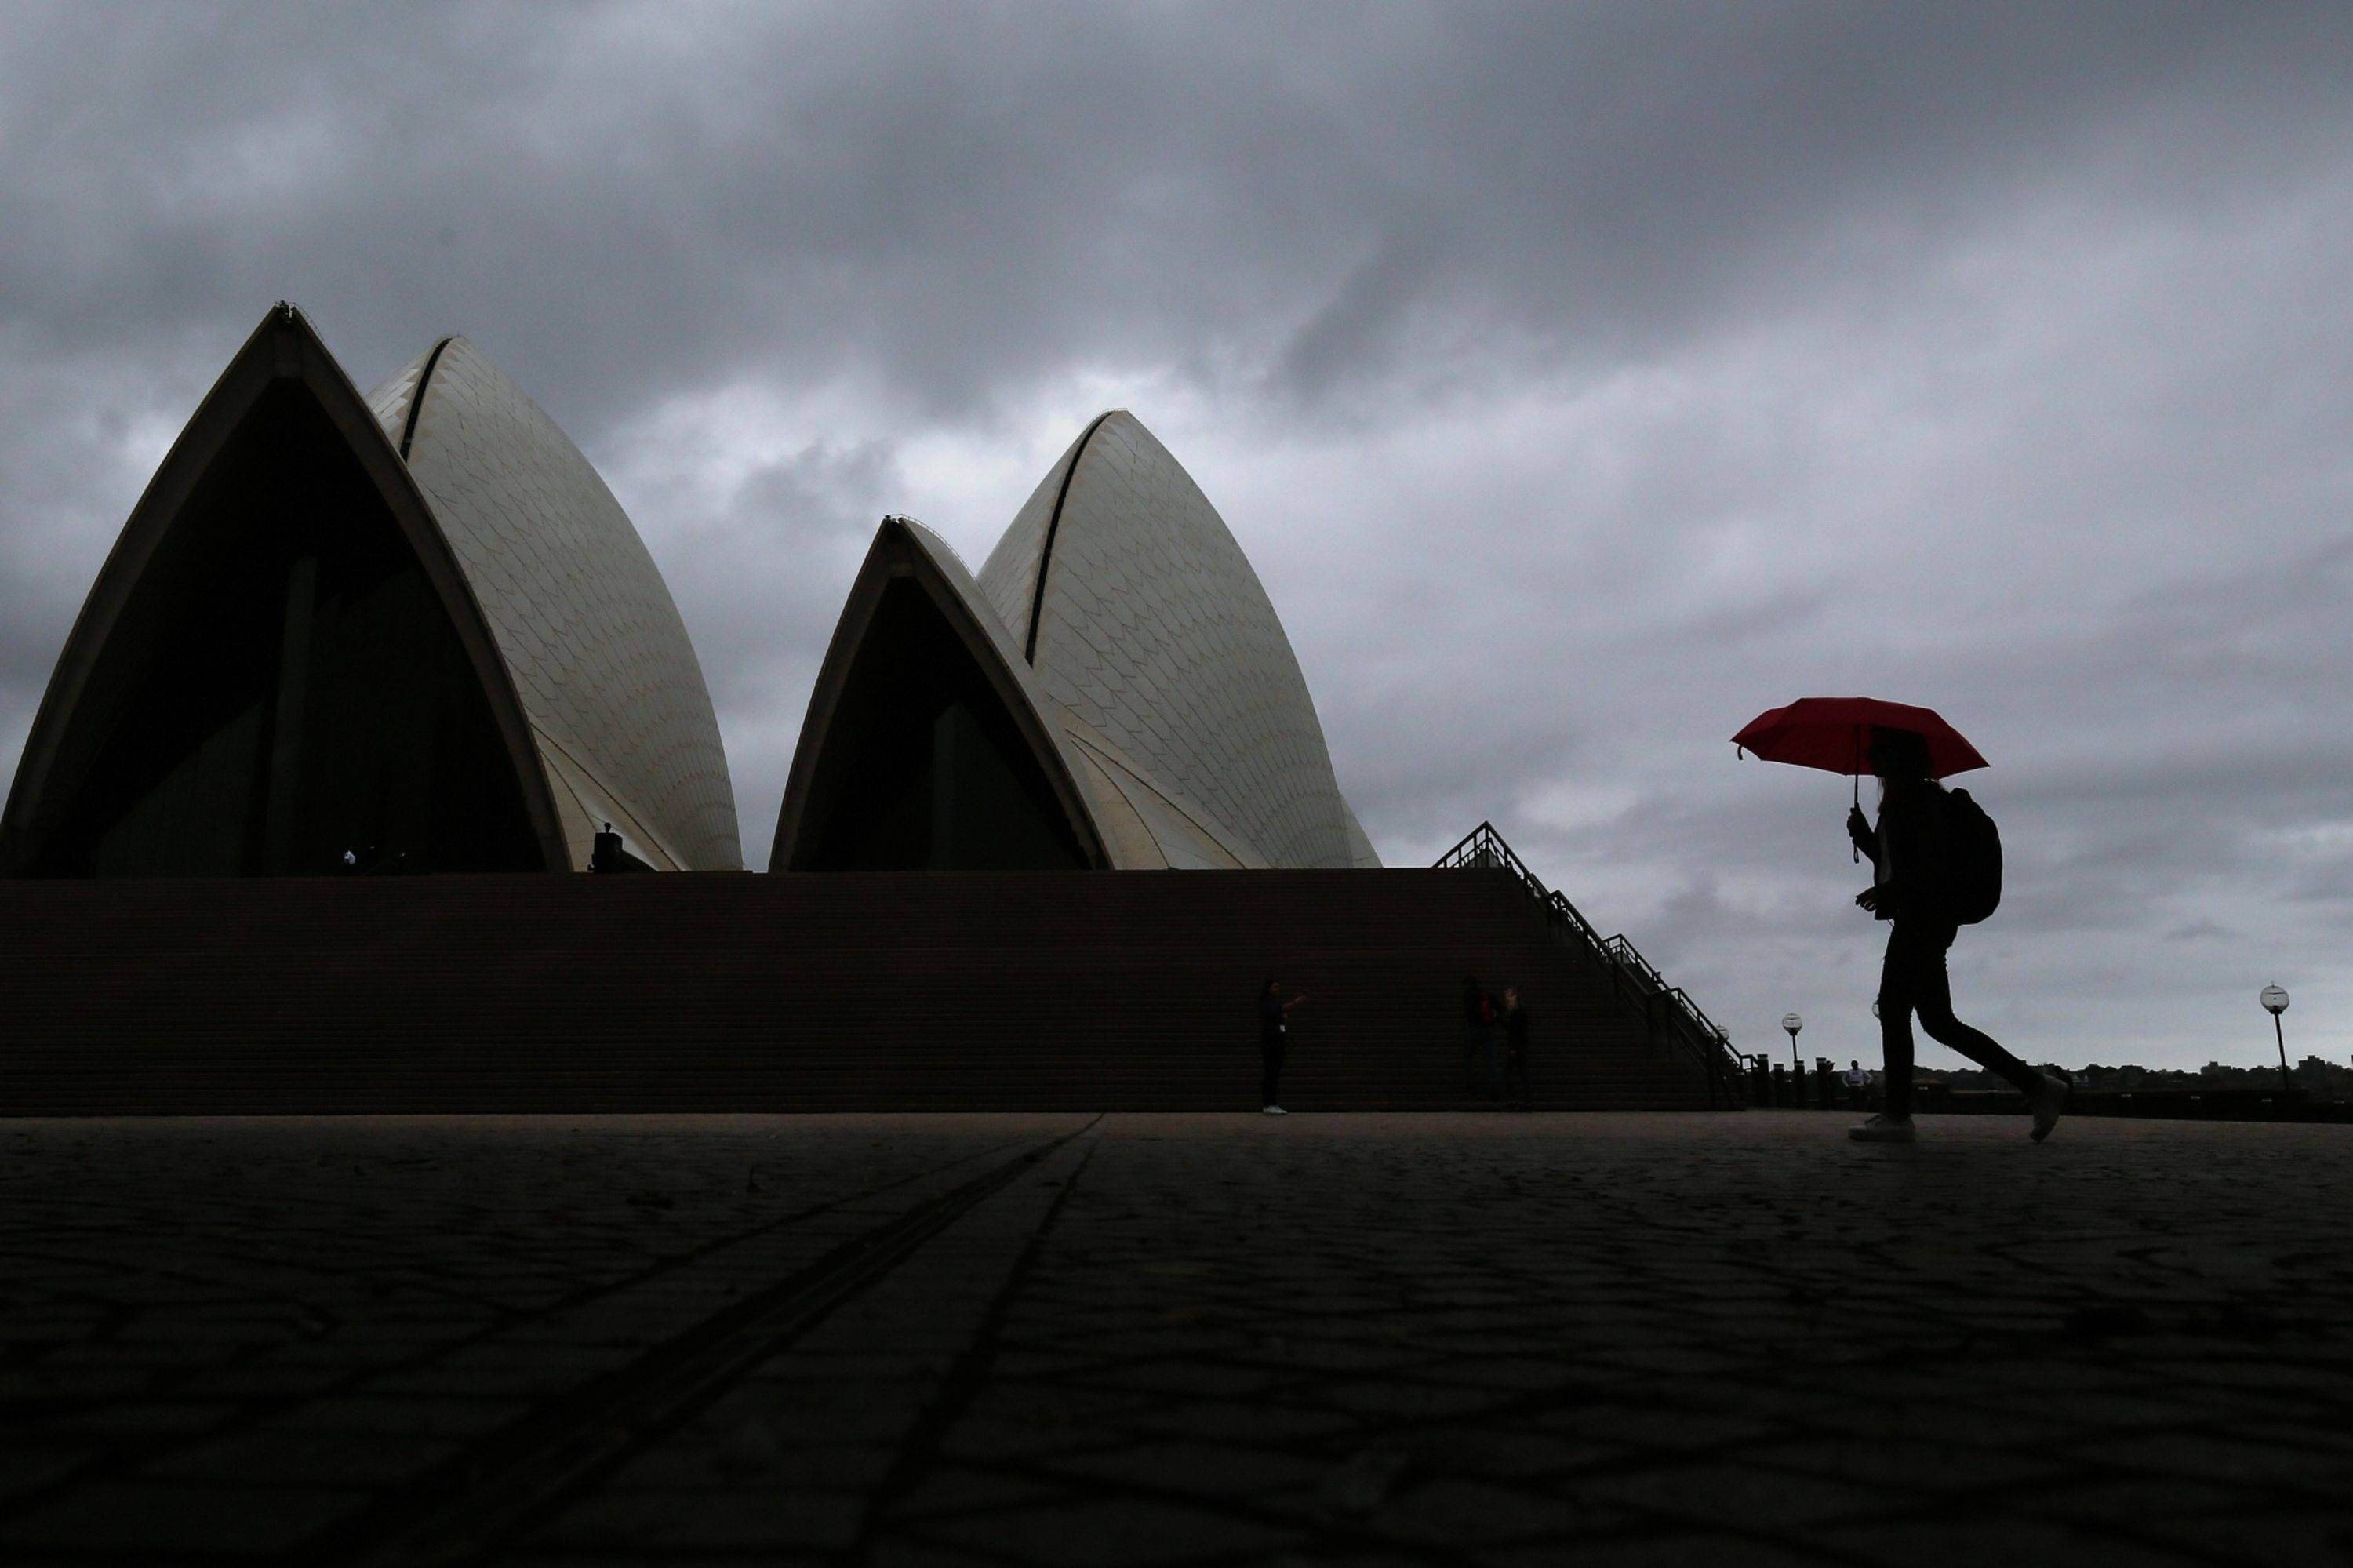 Japan’s buying spree of Australian bonds may cool off with the Reserve Bank of Australia mulling an expansion of its quantitative easing program. | BLOOMBERG